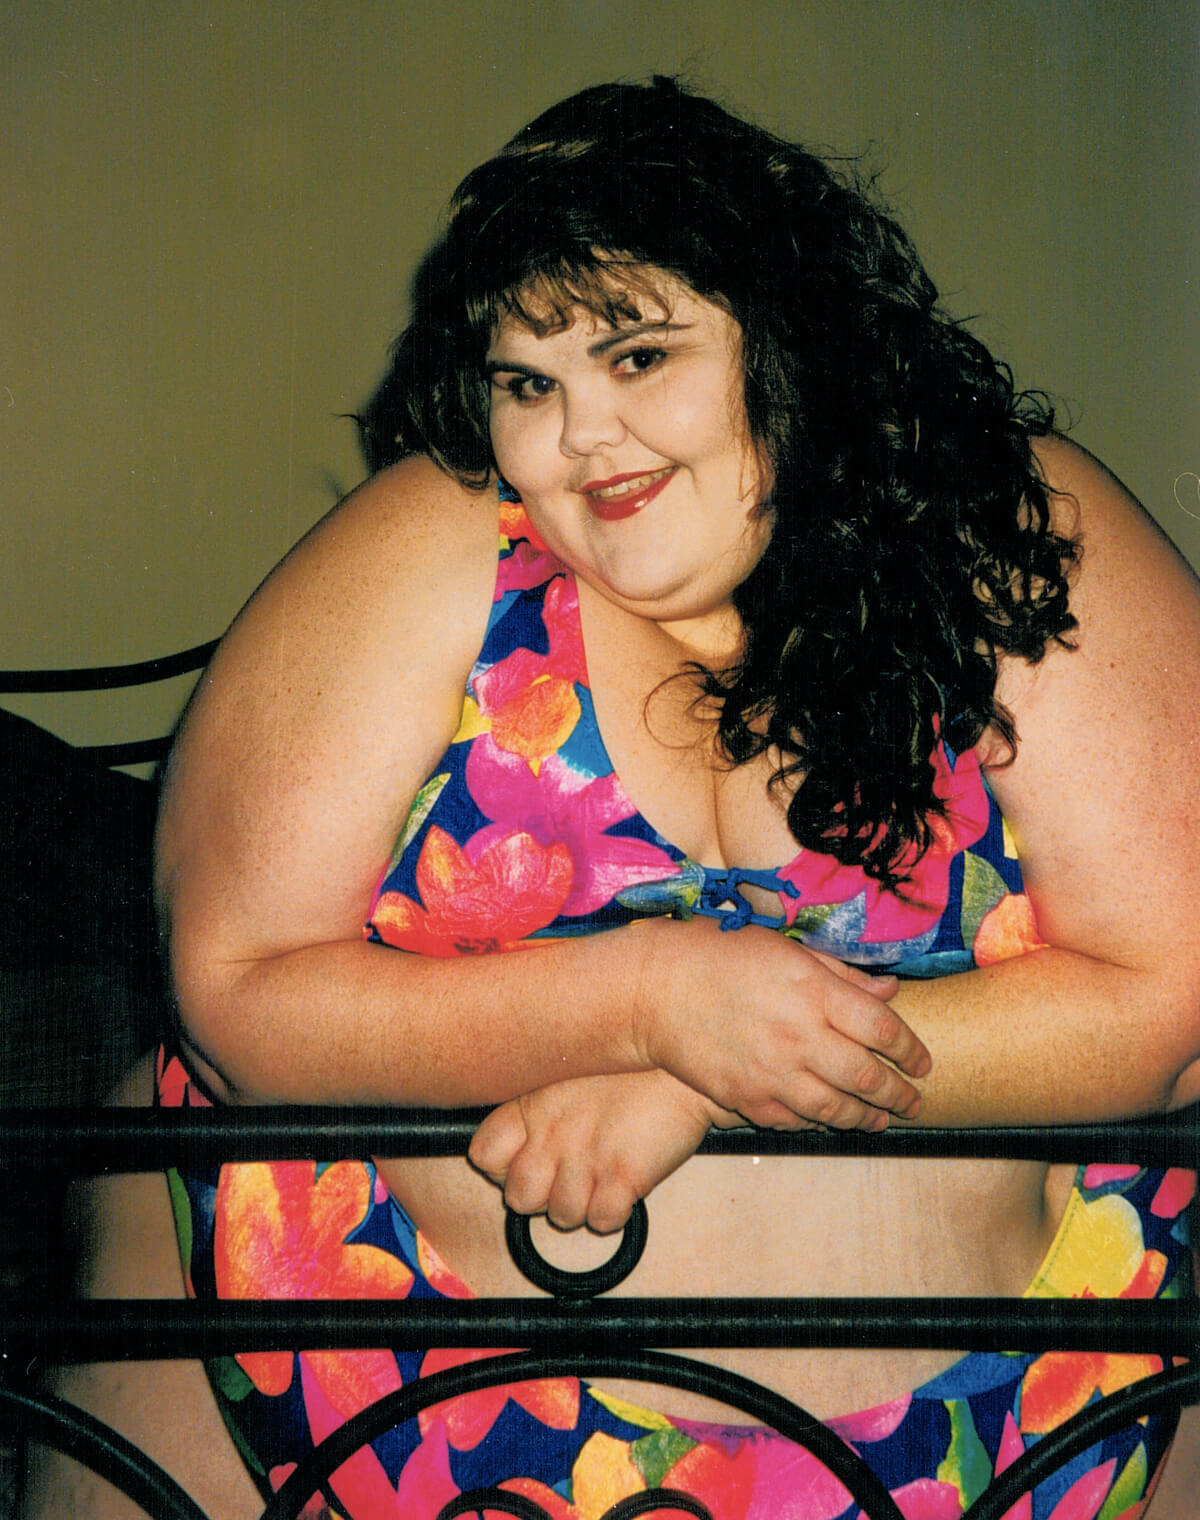 Still from All of Me. A woman wearing a bikini poses at the camera, she is leaning on a bed frame, and smiling.